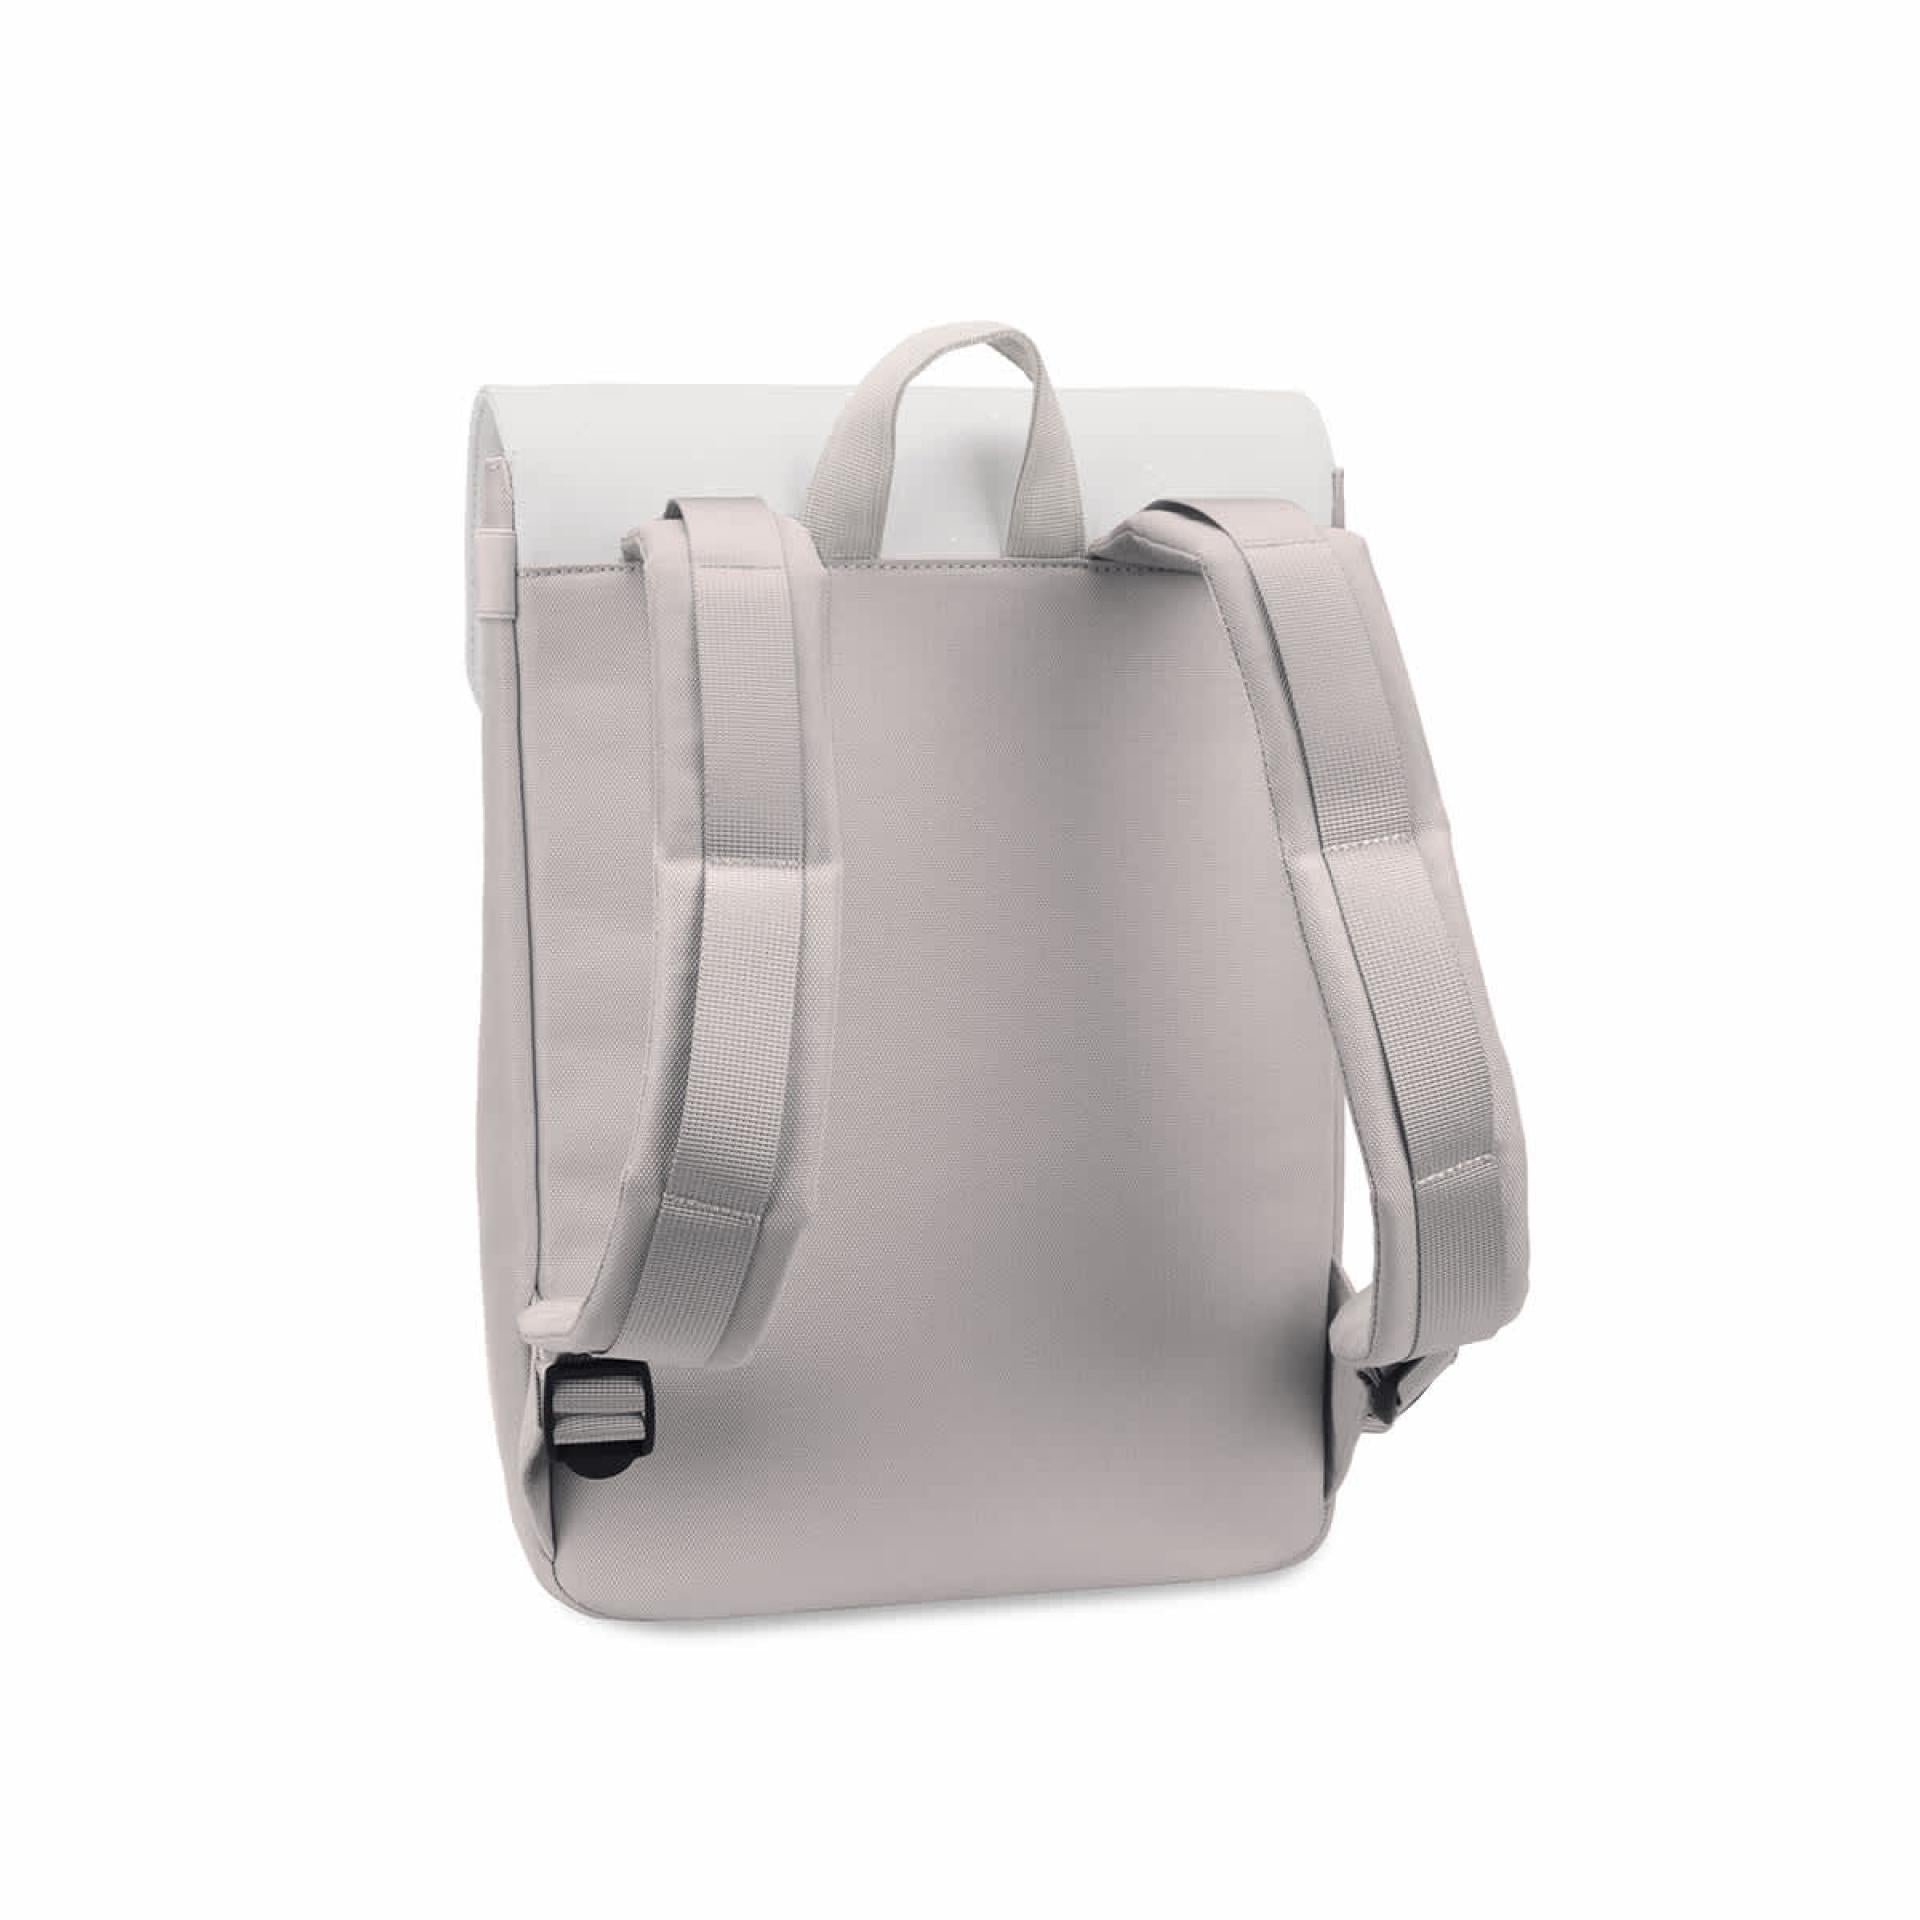 Kapten & Son Rucksack Fyn Small Muted Clay Sprinkled